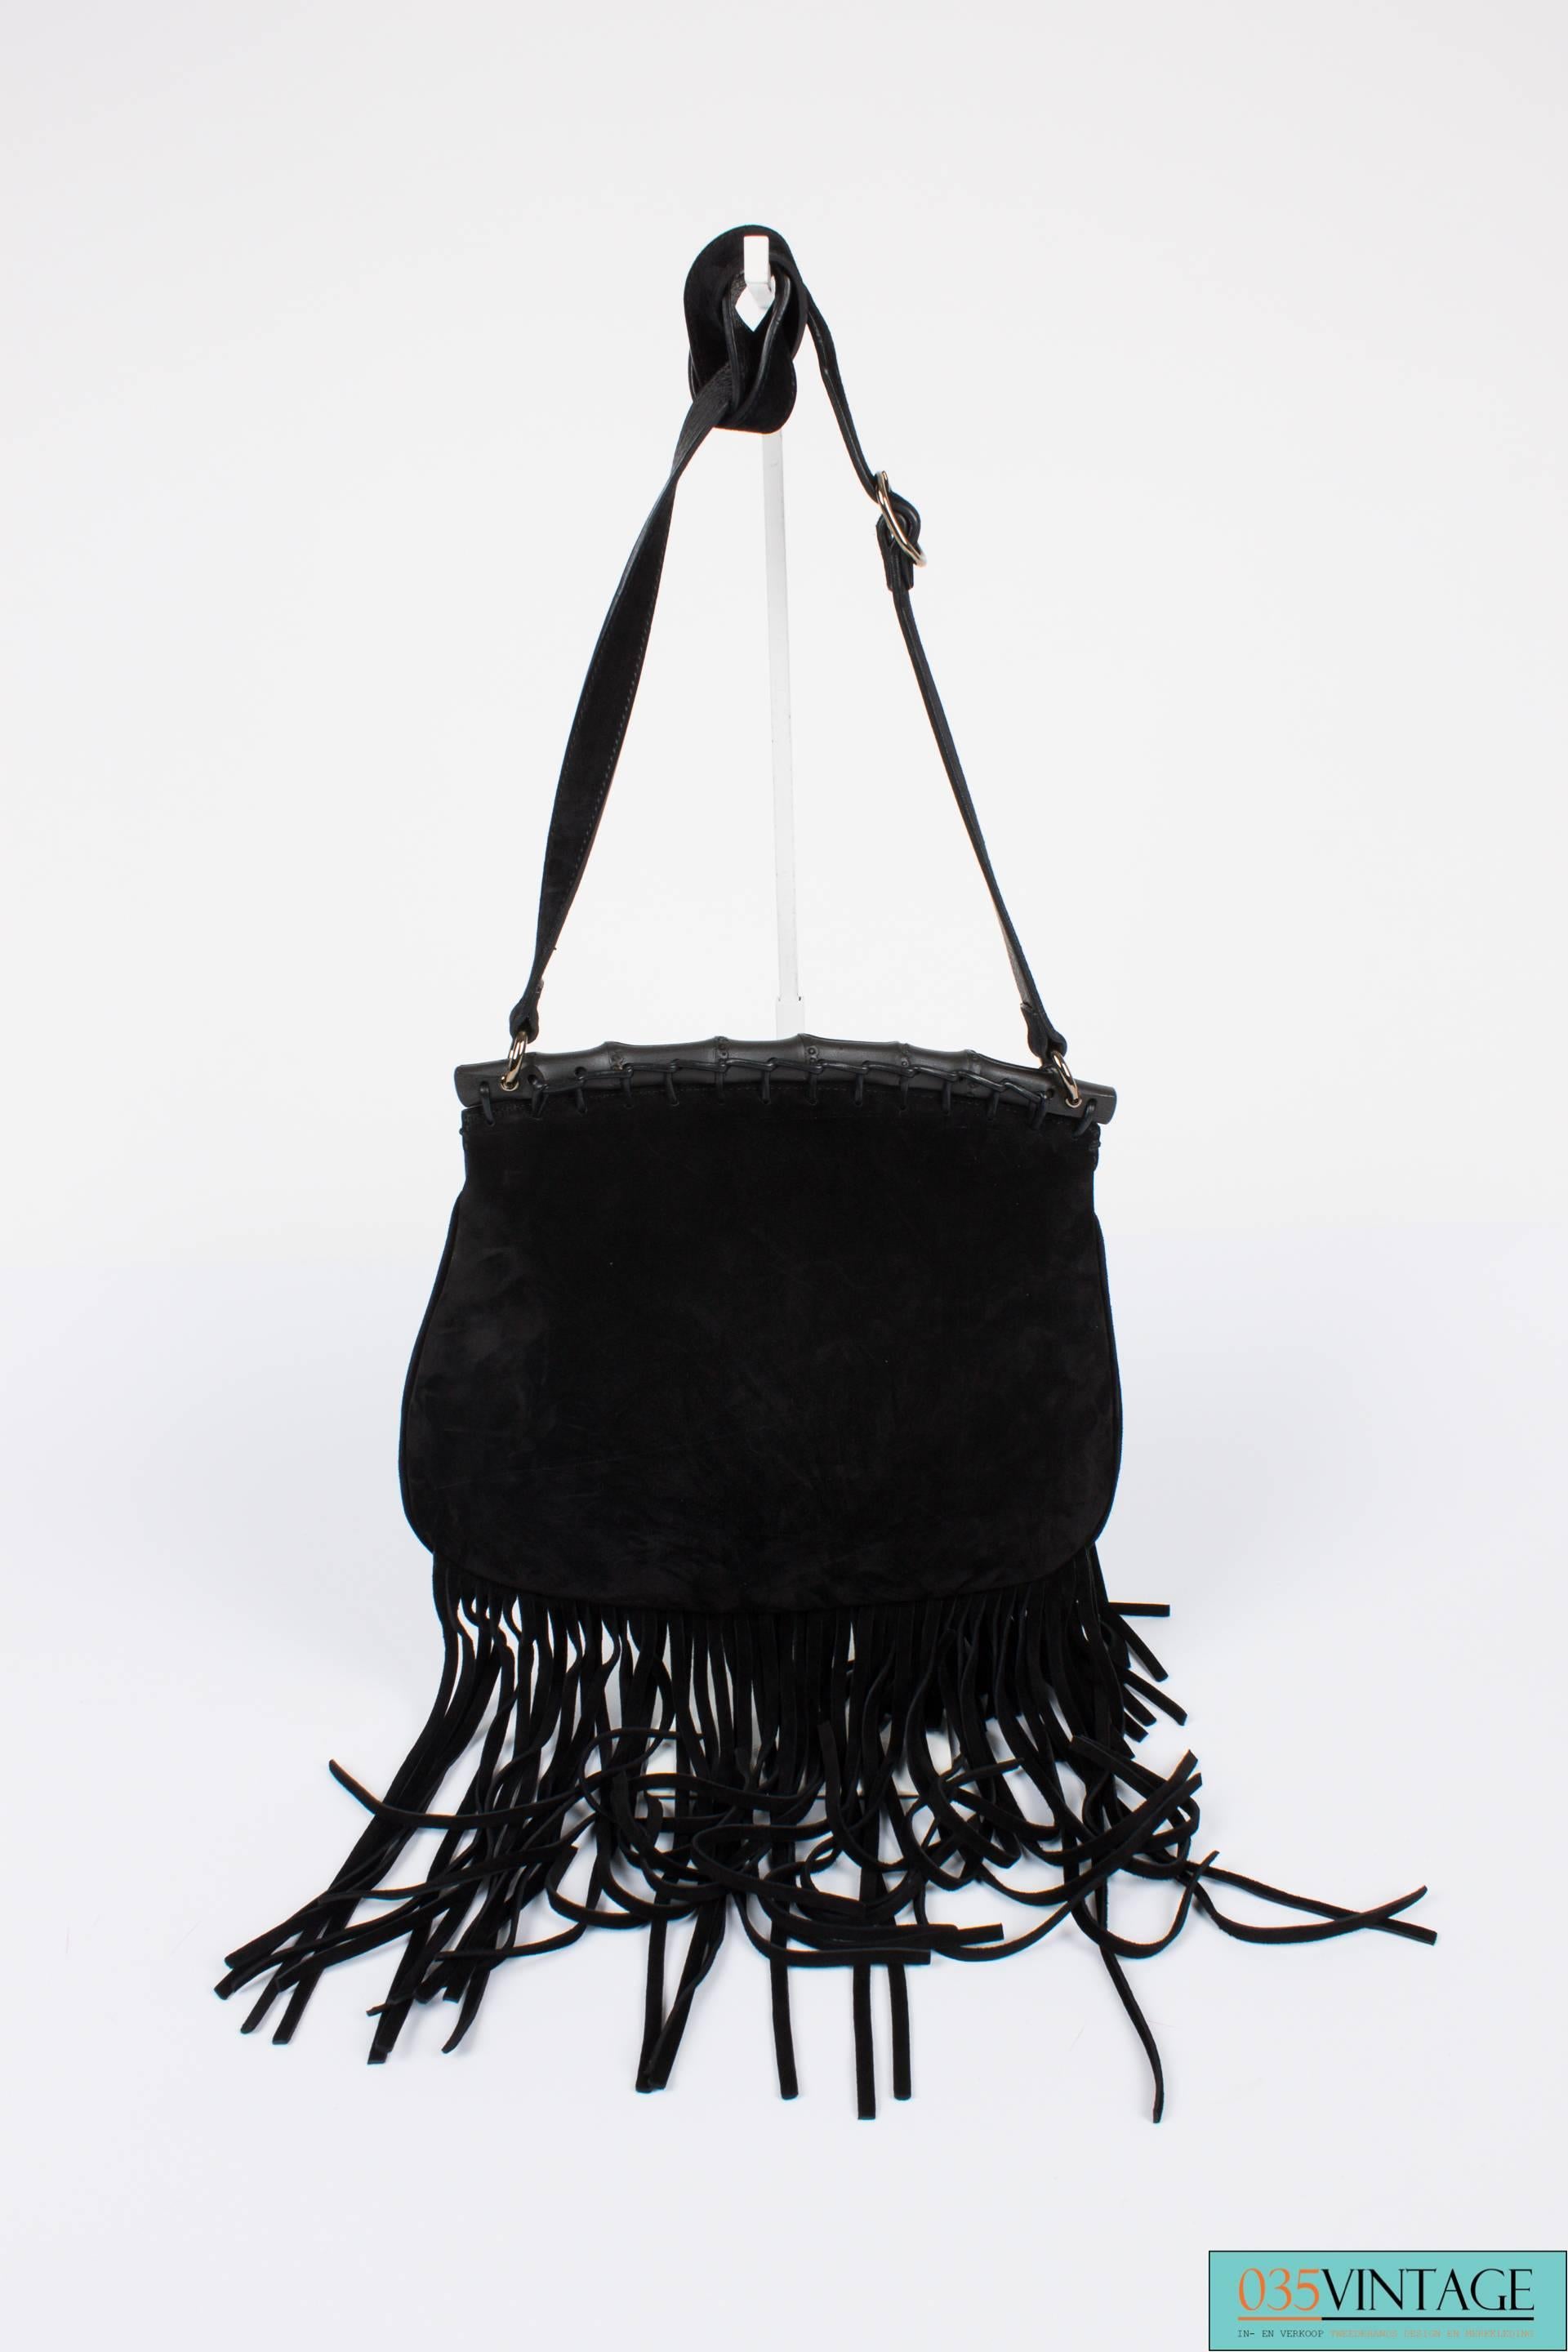 his bag is a statement piece! It is the Gucci Nouveau Fringe Suede Shoulder Bag.

Made of tarry black suede with matte black bamboo and silver hardware. A long adjustable shoulder strap. At the front a large flap, but the bag has not a real